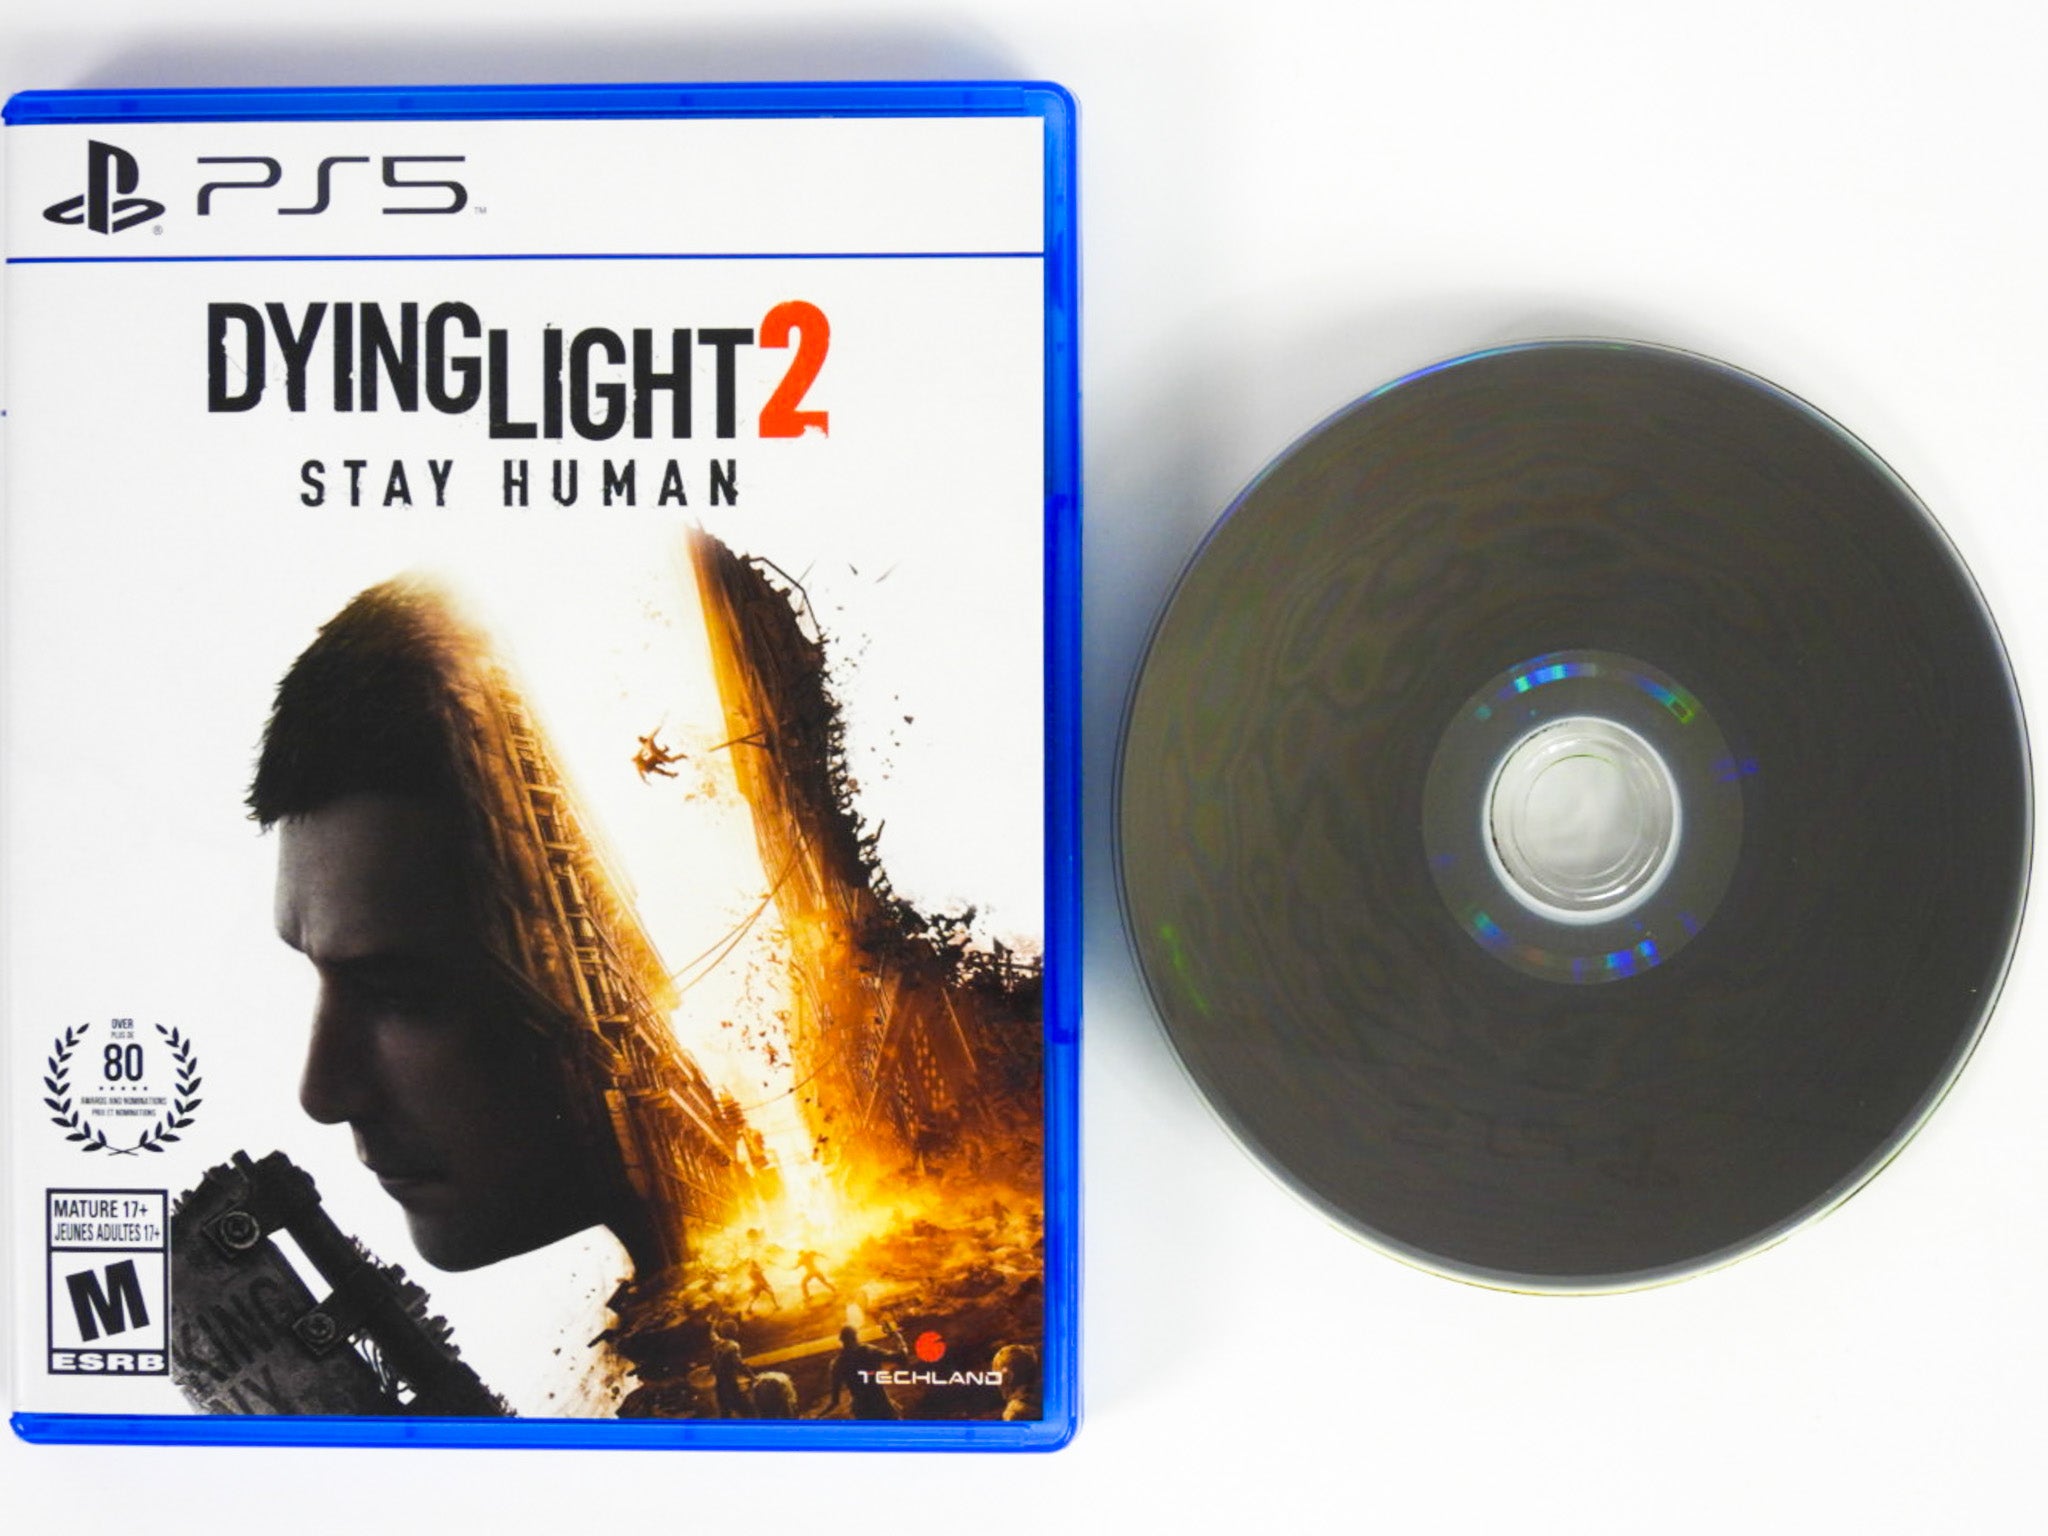 Ps5 - Dying Light 2 Stay Human Sony PlayStation 5 w/ Case #111